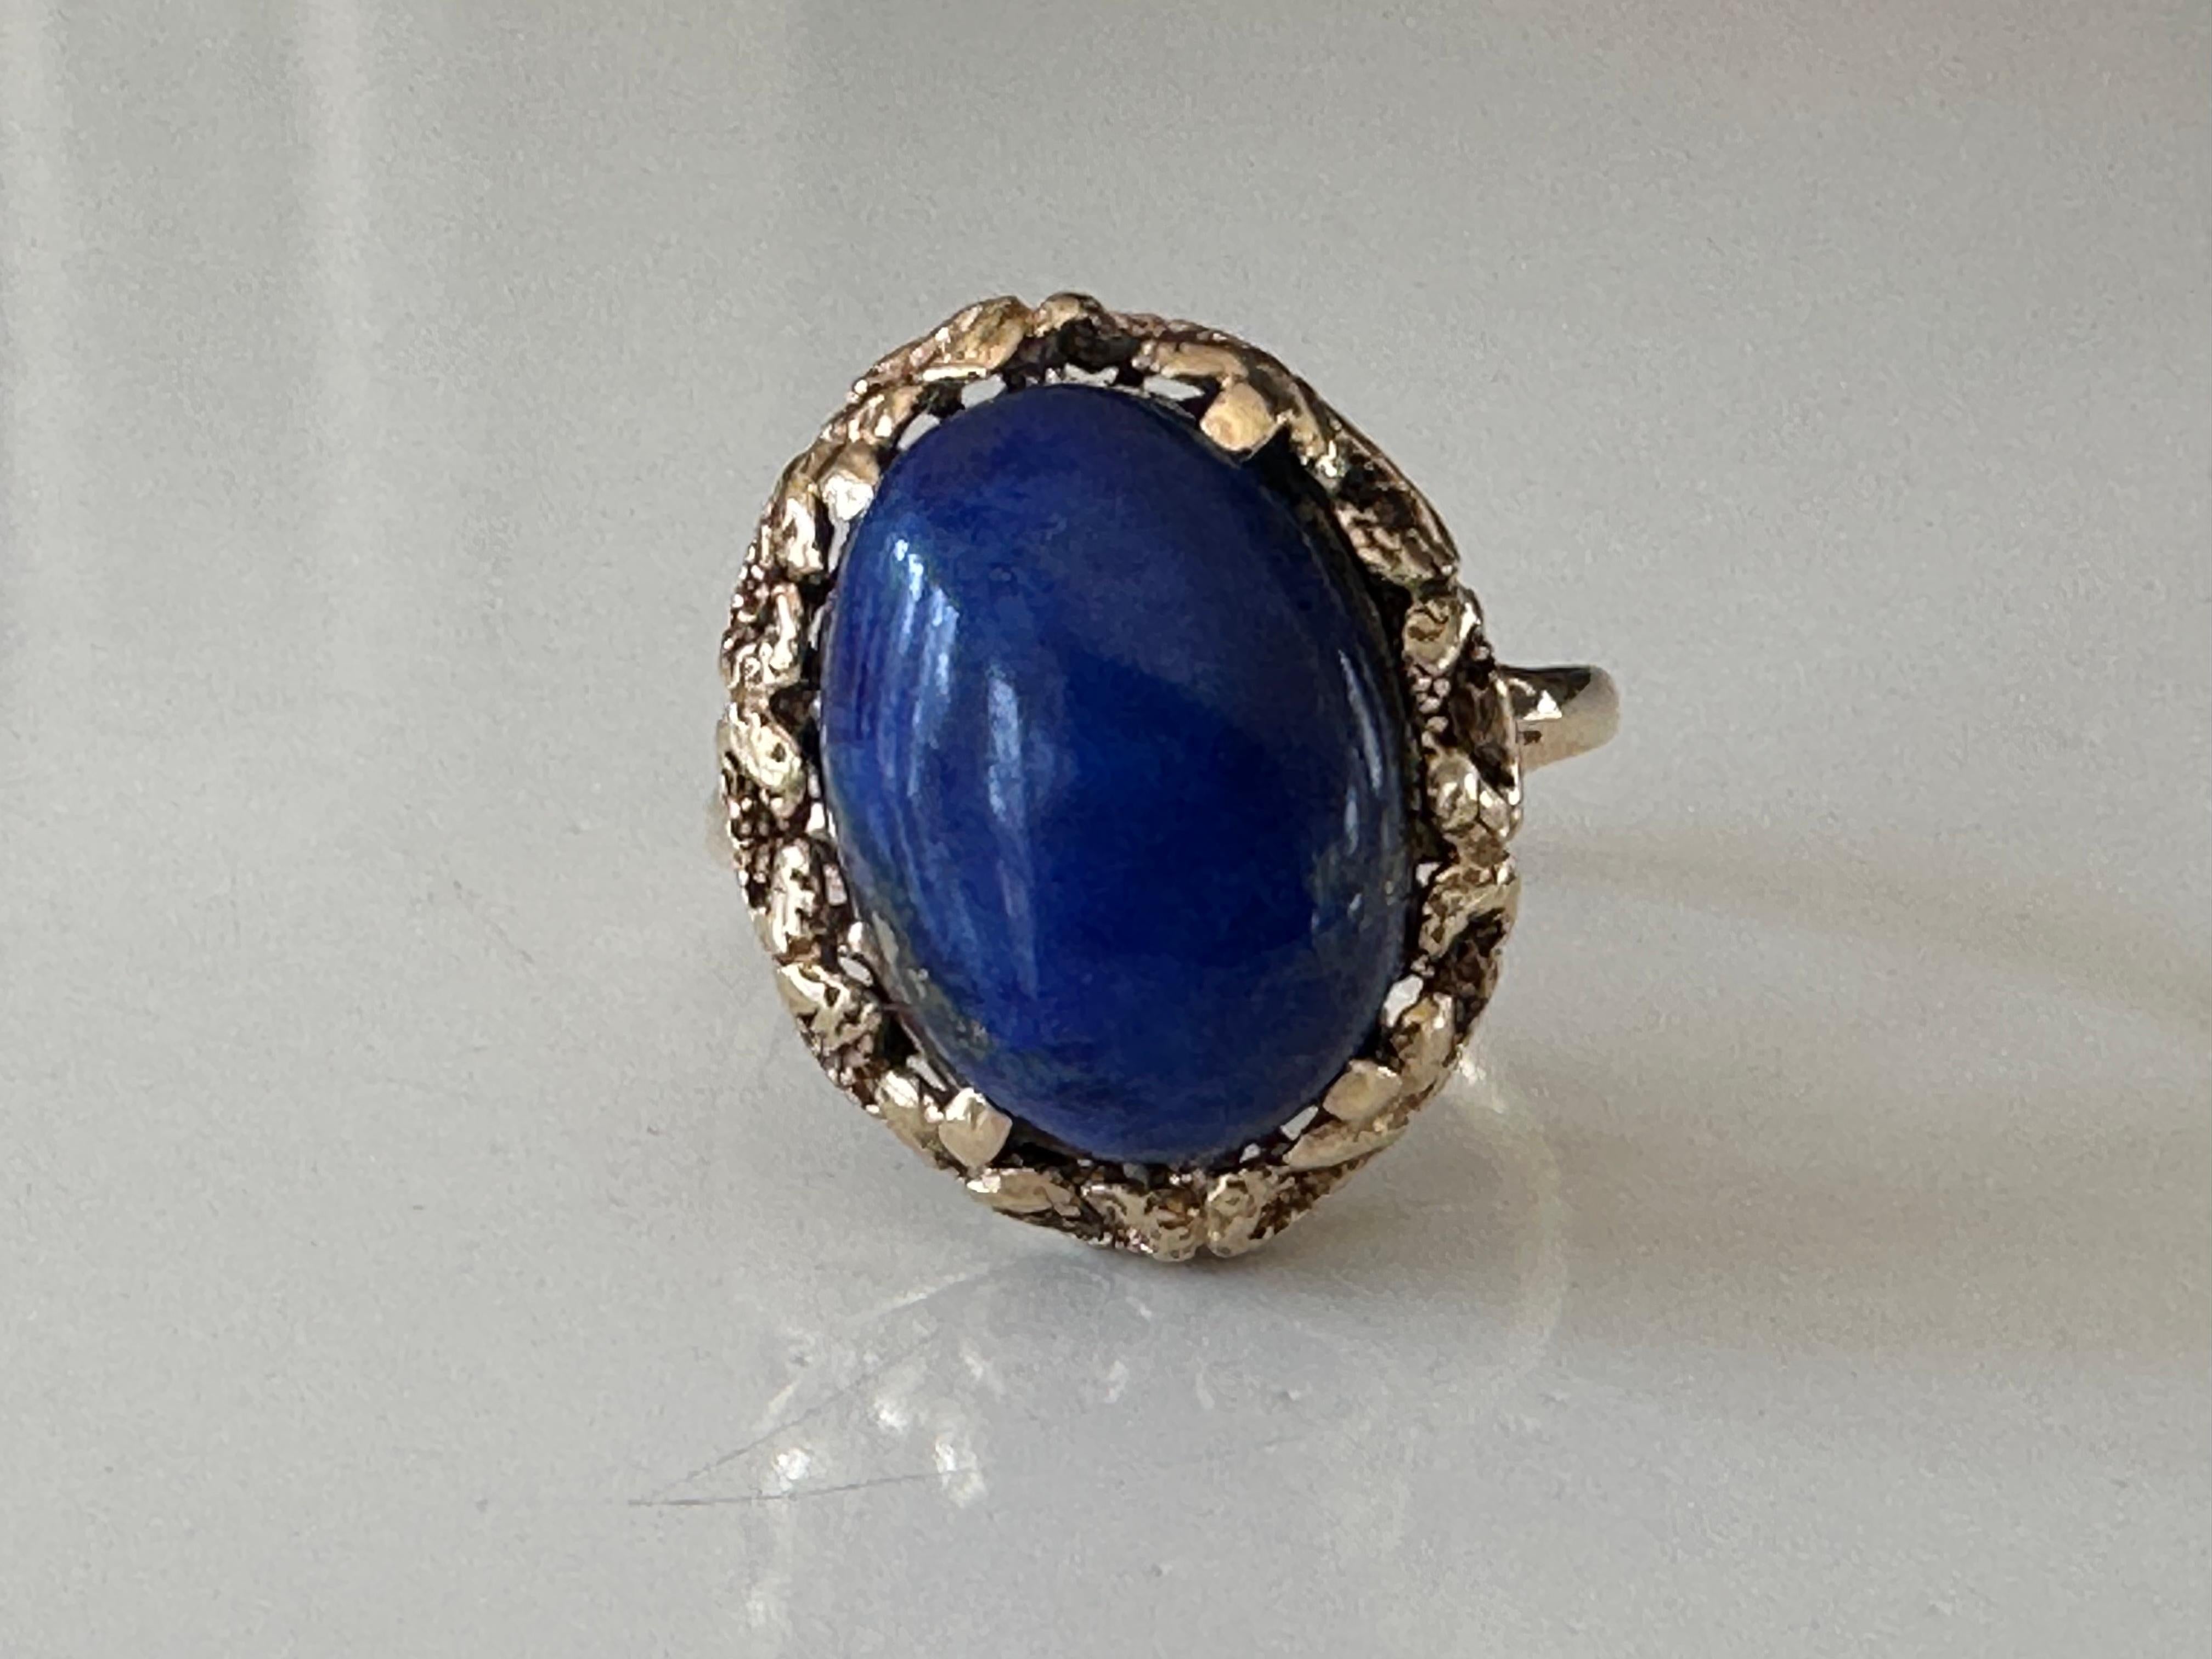 Crafted in the 1950s, this striking vintage cocktail ring is set with a natural lapis lazuli oval-shaped cabochon measuring 11.09 X 15.39mm and weighing approximately 8.59 carats. It is mounted in 14k yellow gold with delicate piercing. 
